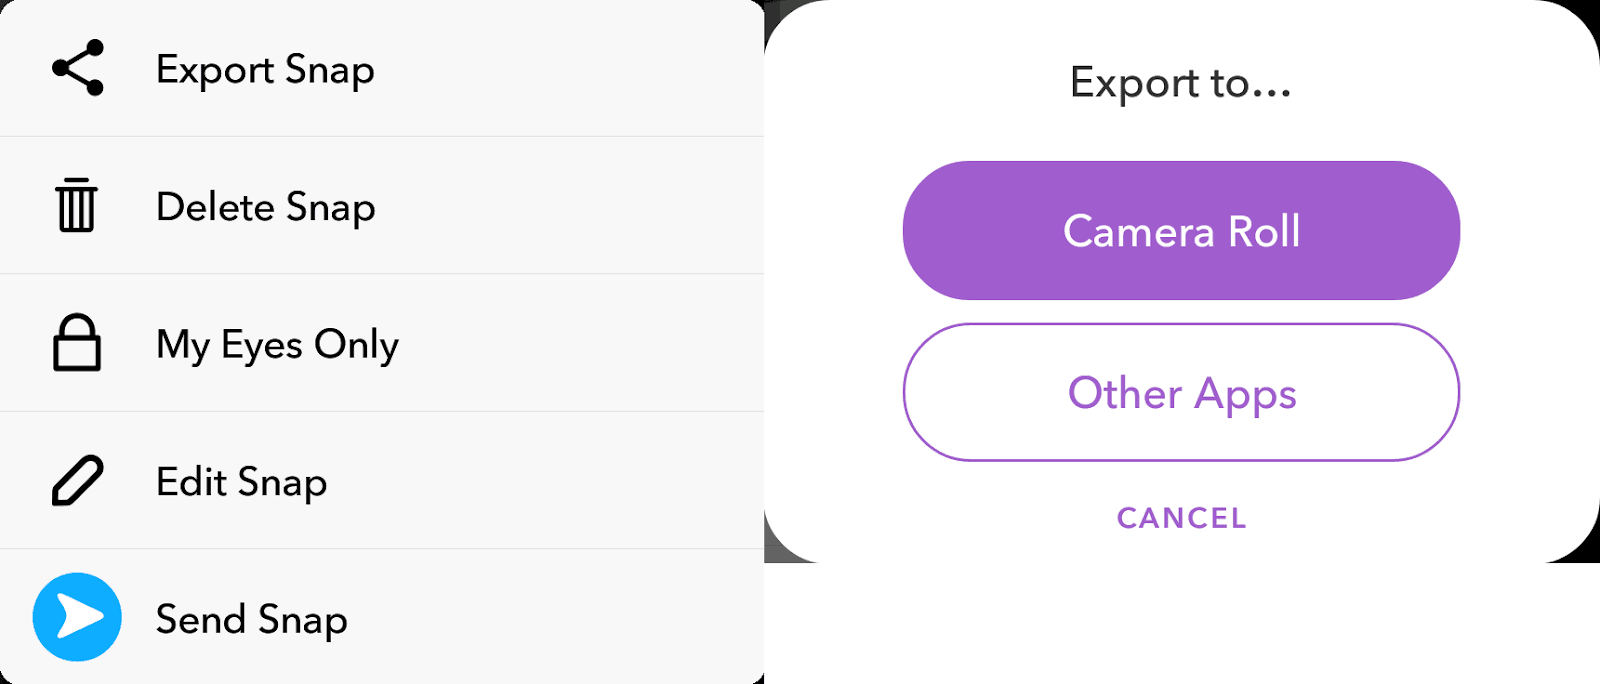 Save the snap with mobile device's dialog